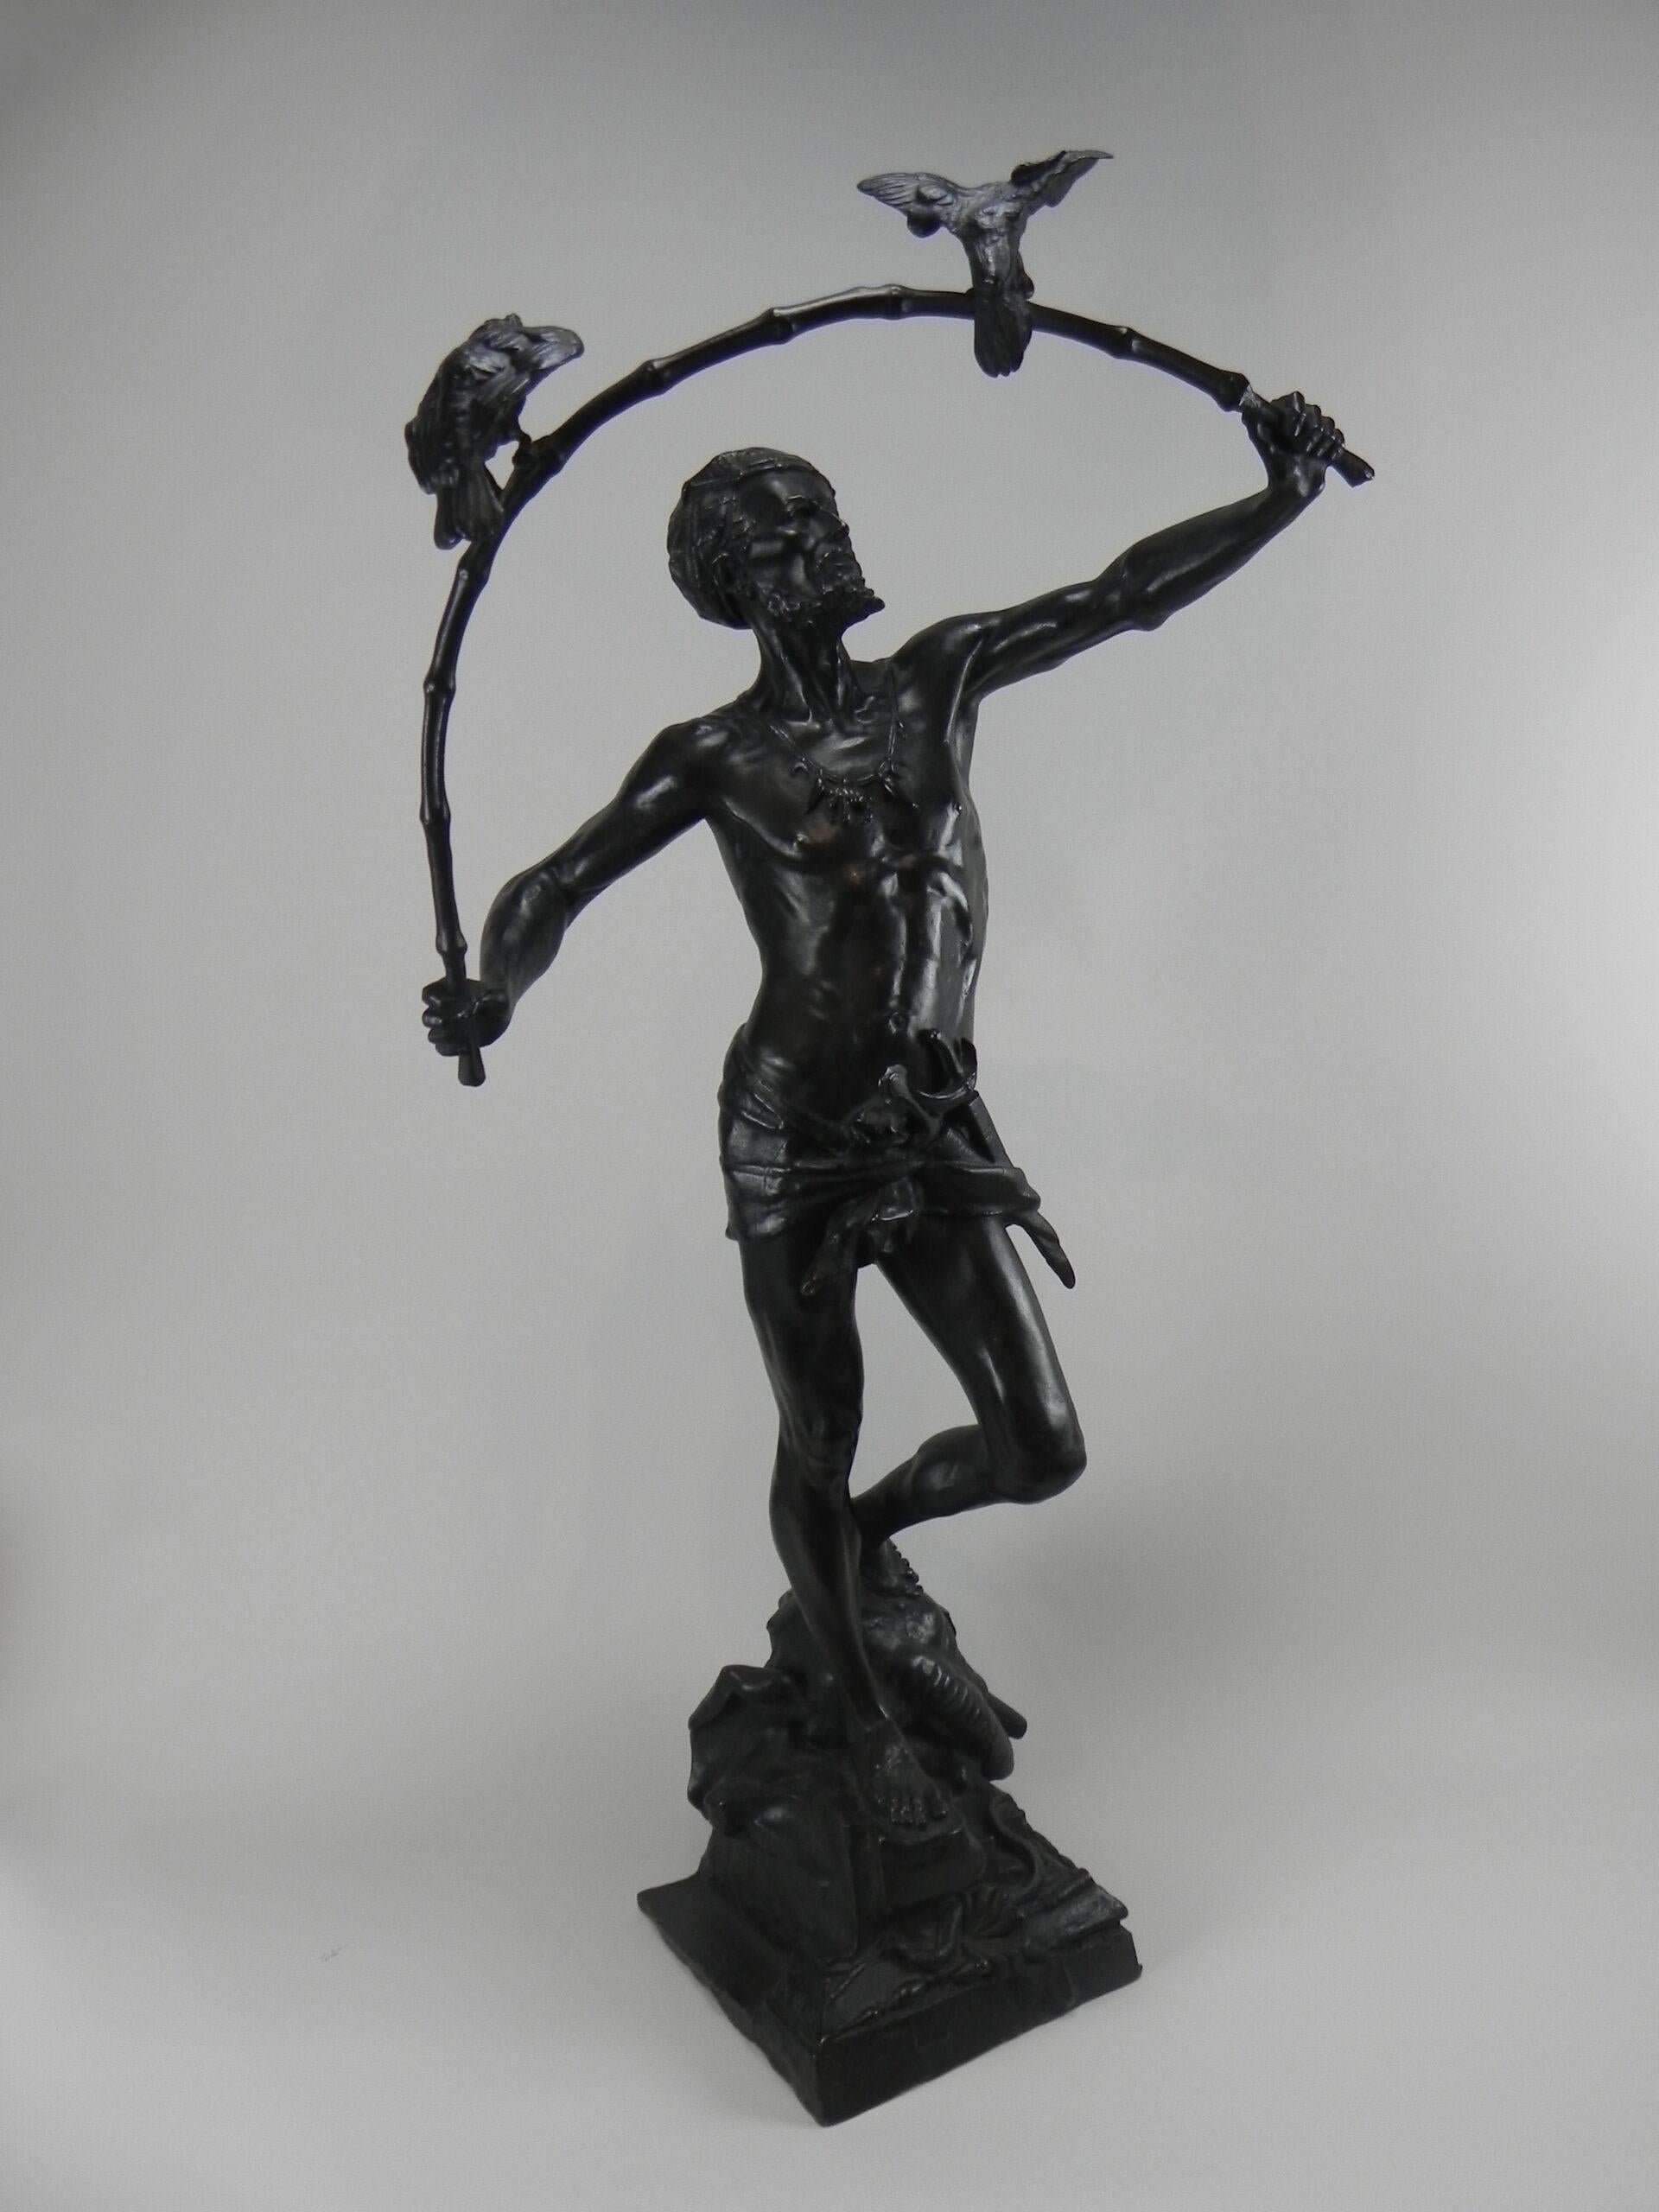 Hindu Birdcatcher
A fine quality, a nineteenth-century bronze cast of the Hindu bird-catcher standing on an elephant skull and holding two birds in the air which are sitting on a bambu stick by Auguste De Wever (Belgian 1836-1910). Old cast probably